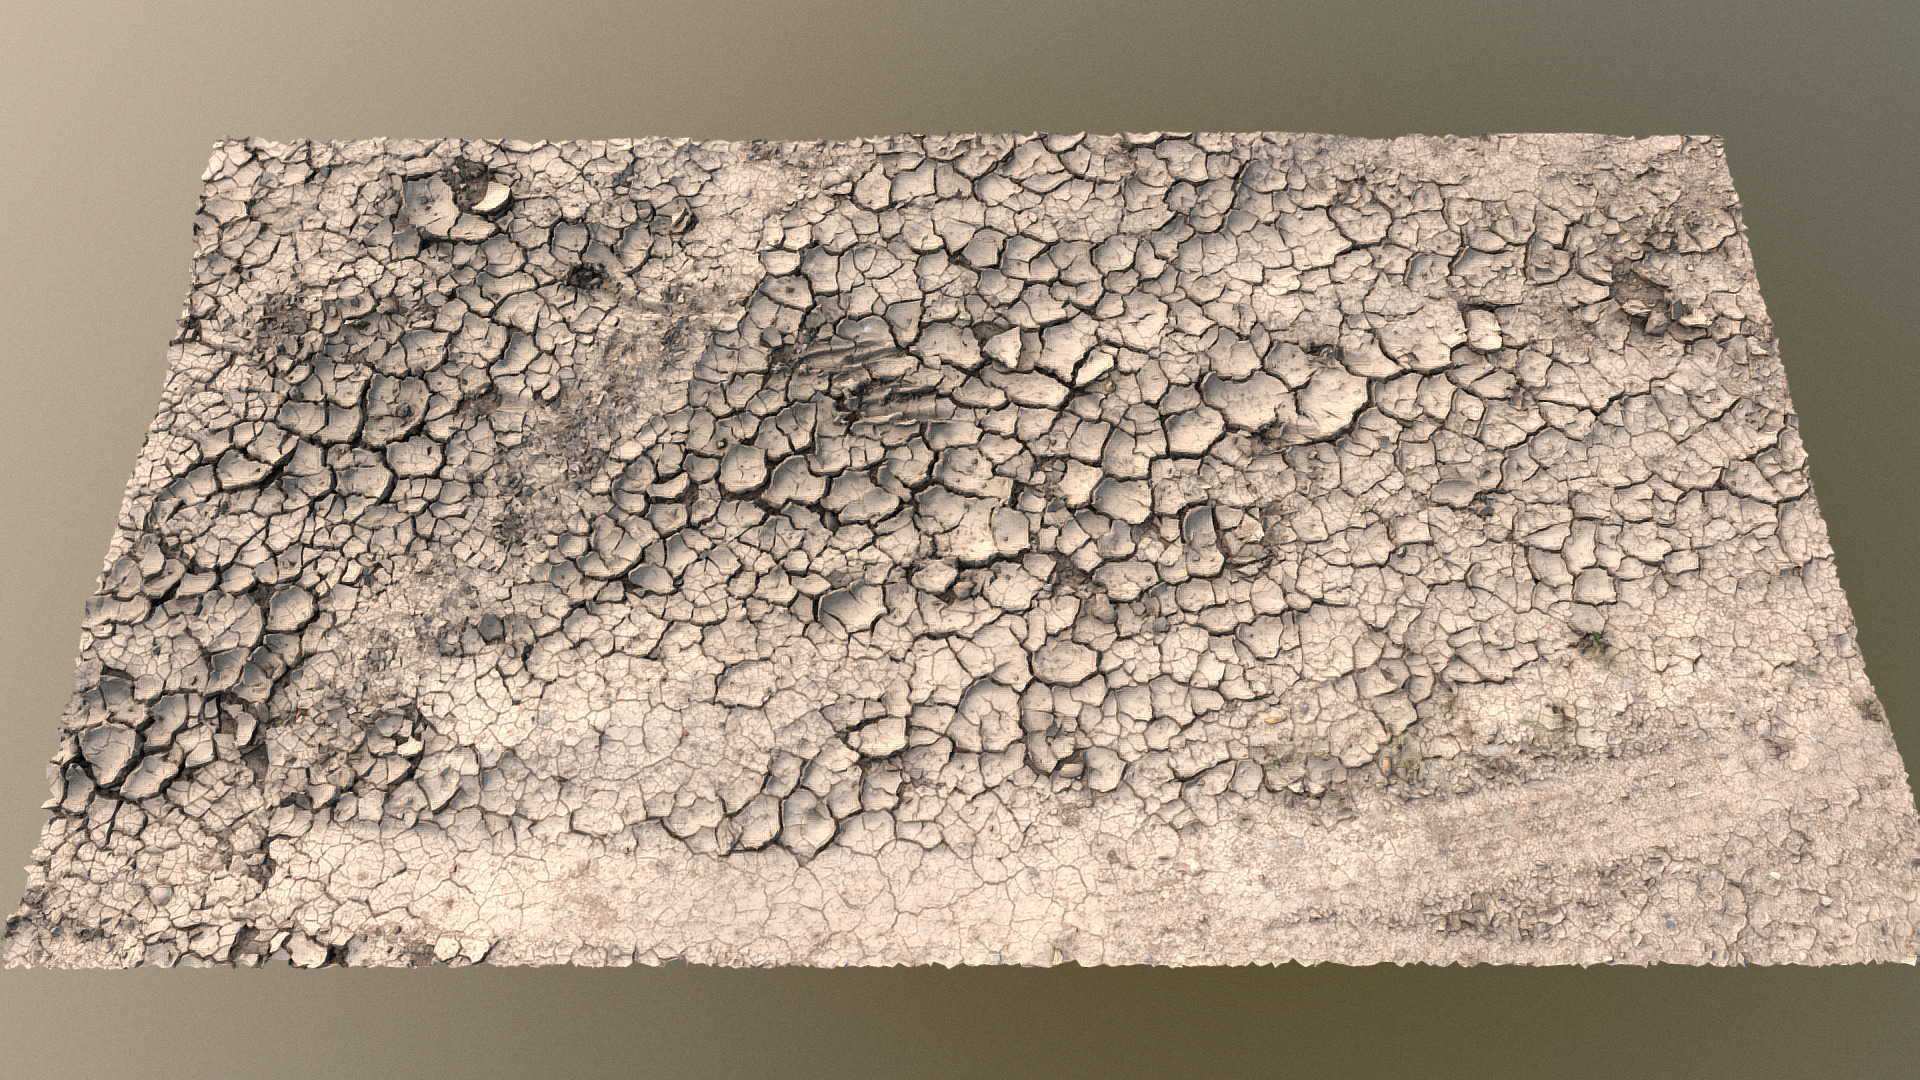 3D model Drought dry soil desert cracks ground erosion II - This is a 3D model of the Drought dry soil desert cracks ground erosion II. The 3D model is about a close-up of a rock.